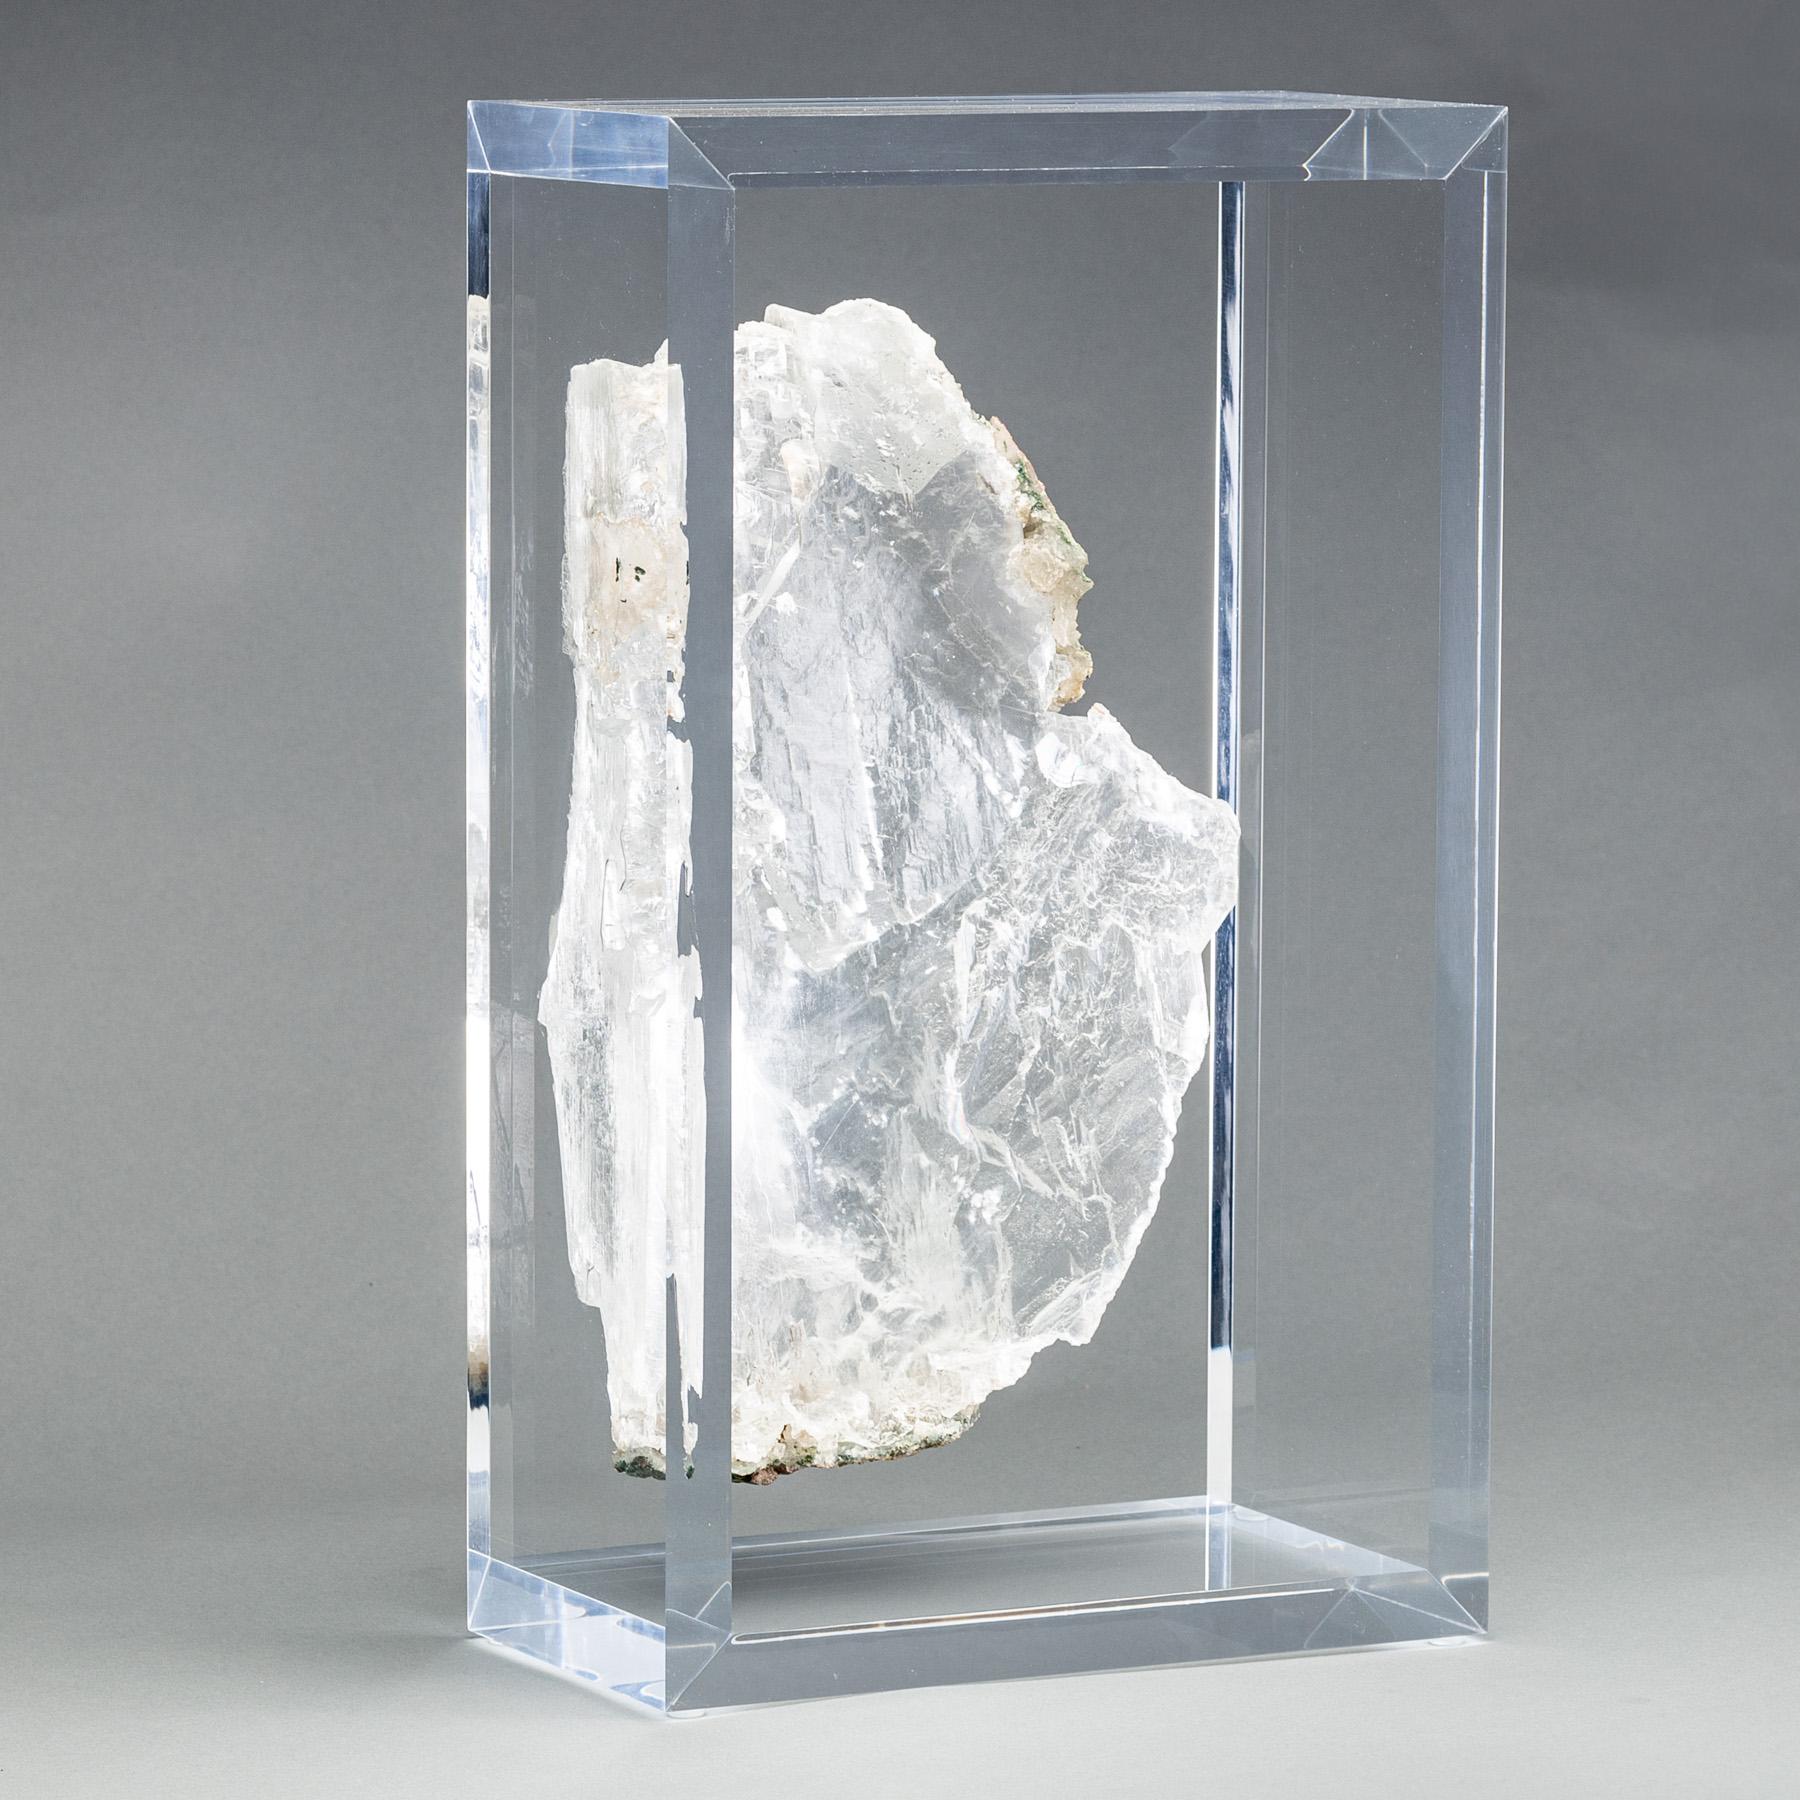 A one of a kind Ice clear selenite specimen from  Rio Grande do Sul, Brazil. With stunning reflective luster and natural lines of growth.  Mounted on  an original design of acrylic box. 


